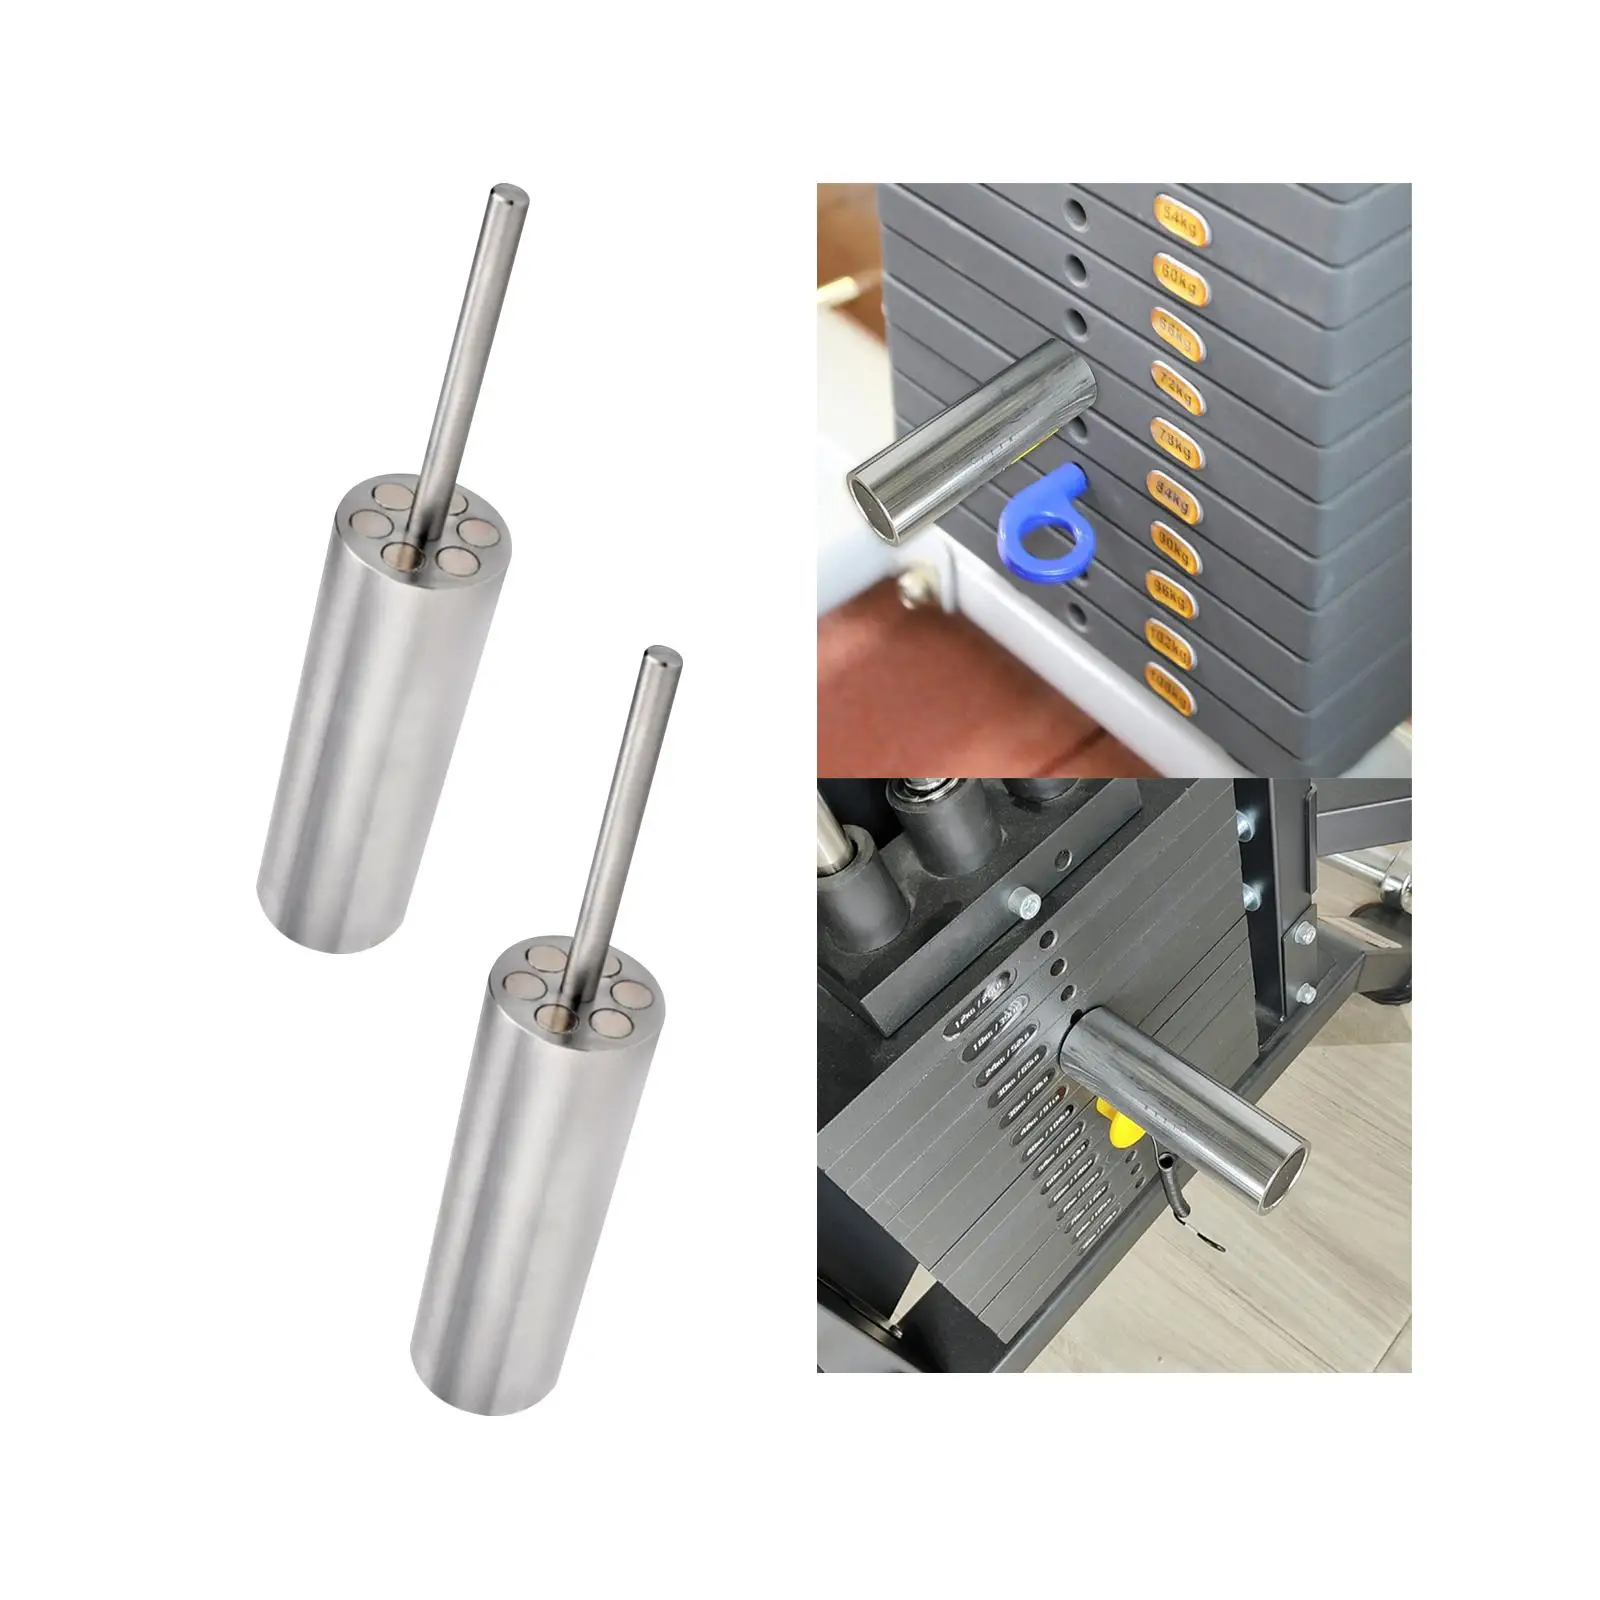 Barbell Loading Pin Weight Loading Pin for Pulley Cable Machine Pulldown Gym